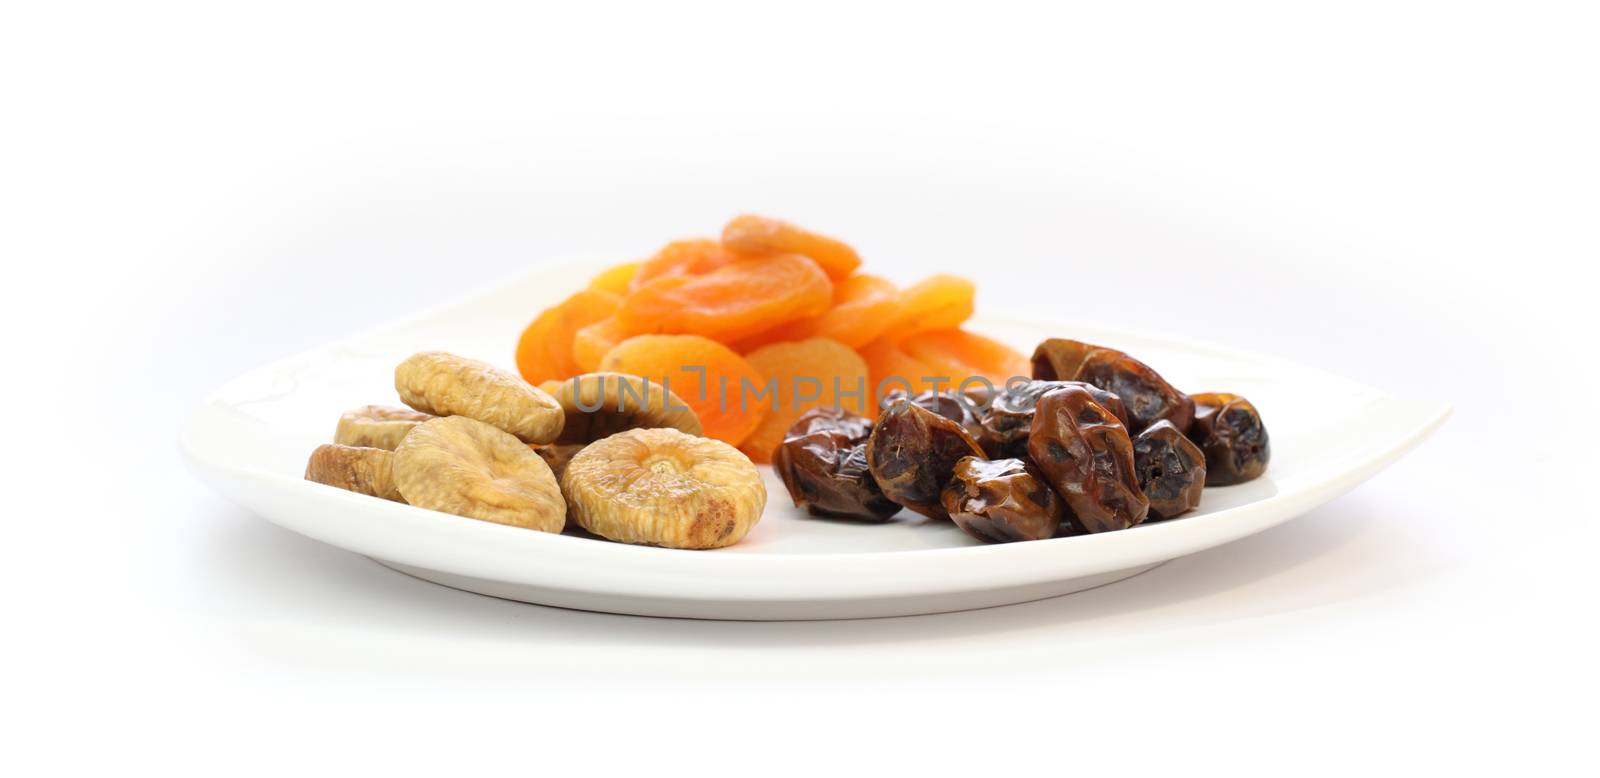 Dried fruits on a white plate